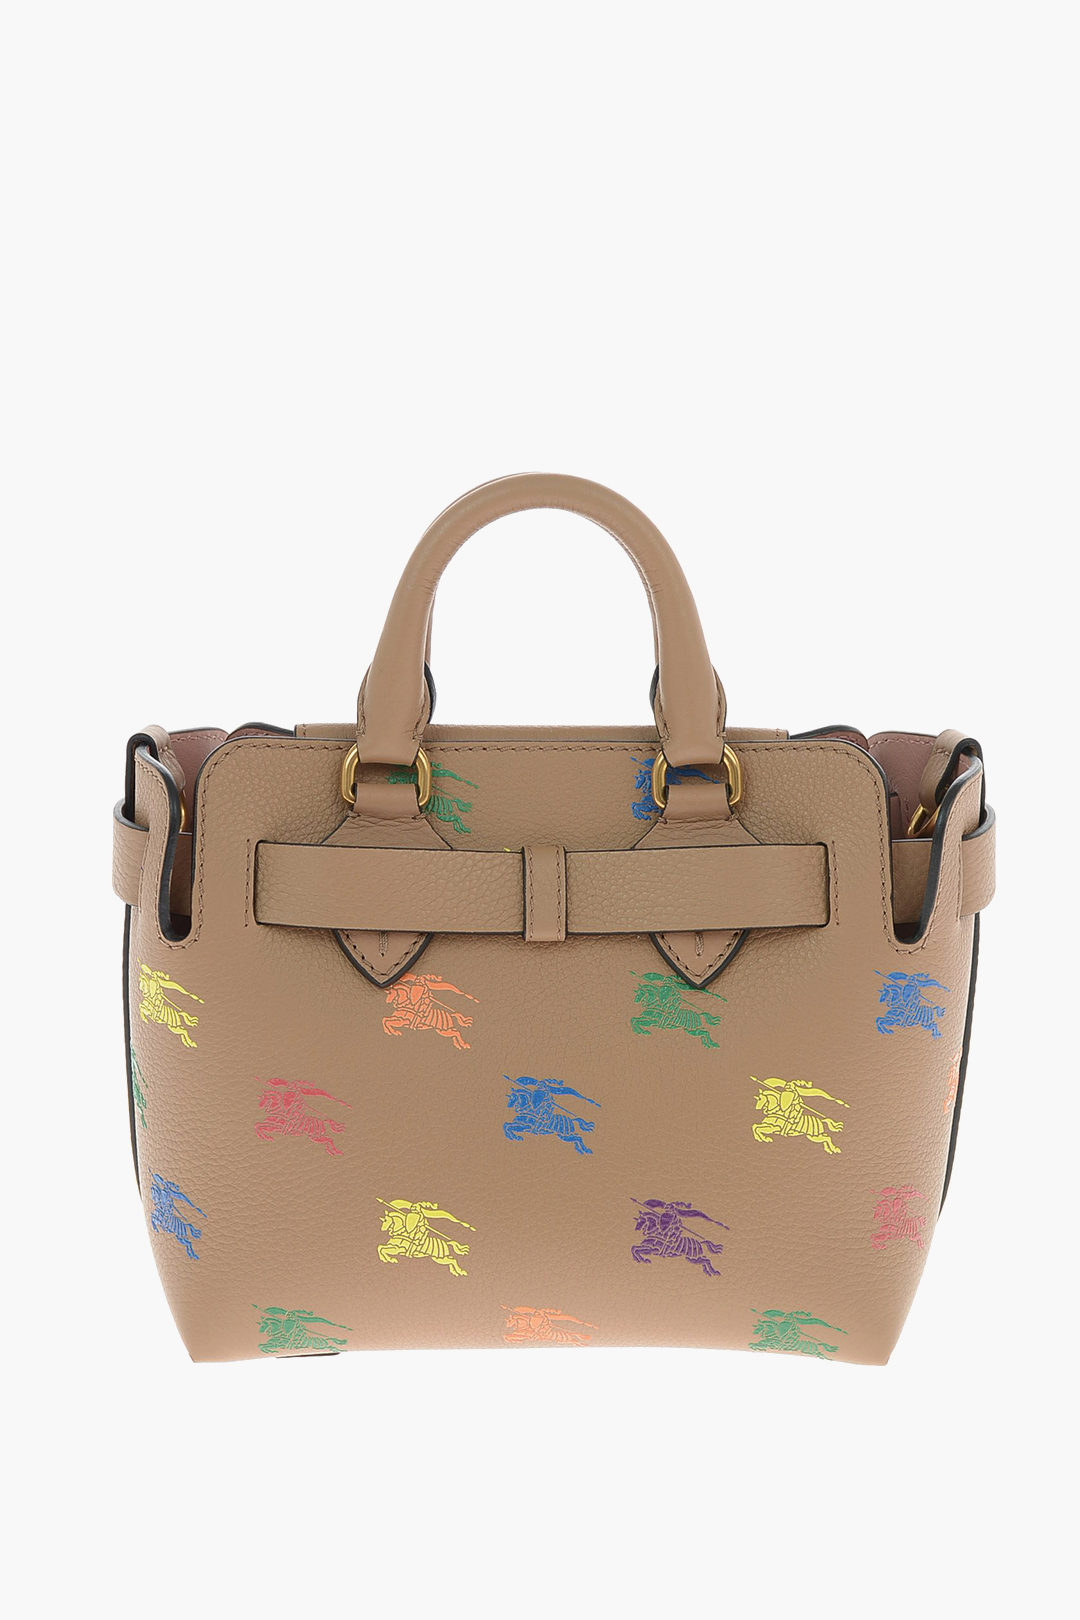 Burberry HORSE RAINBOW Printed Leather BABY BELT Tote Bag women - Glamood  Outlet